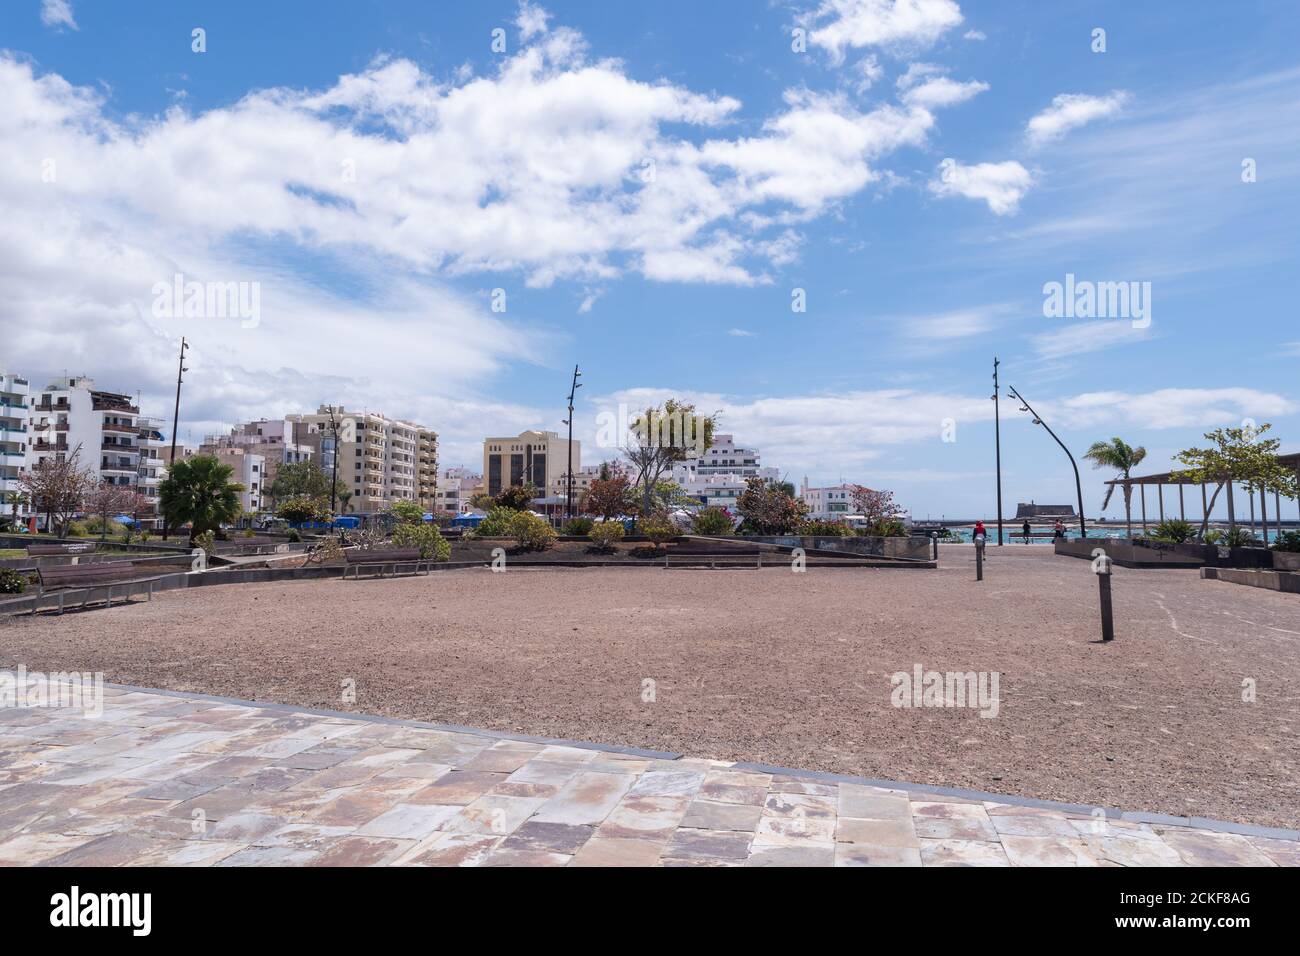 Lanzarote / Spain - March 20, 2016: Park in the center of the town of Arrecife on the island of Lanzarote, Canary Islands, Spain Stock Photo